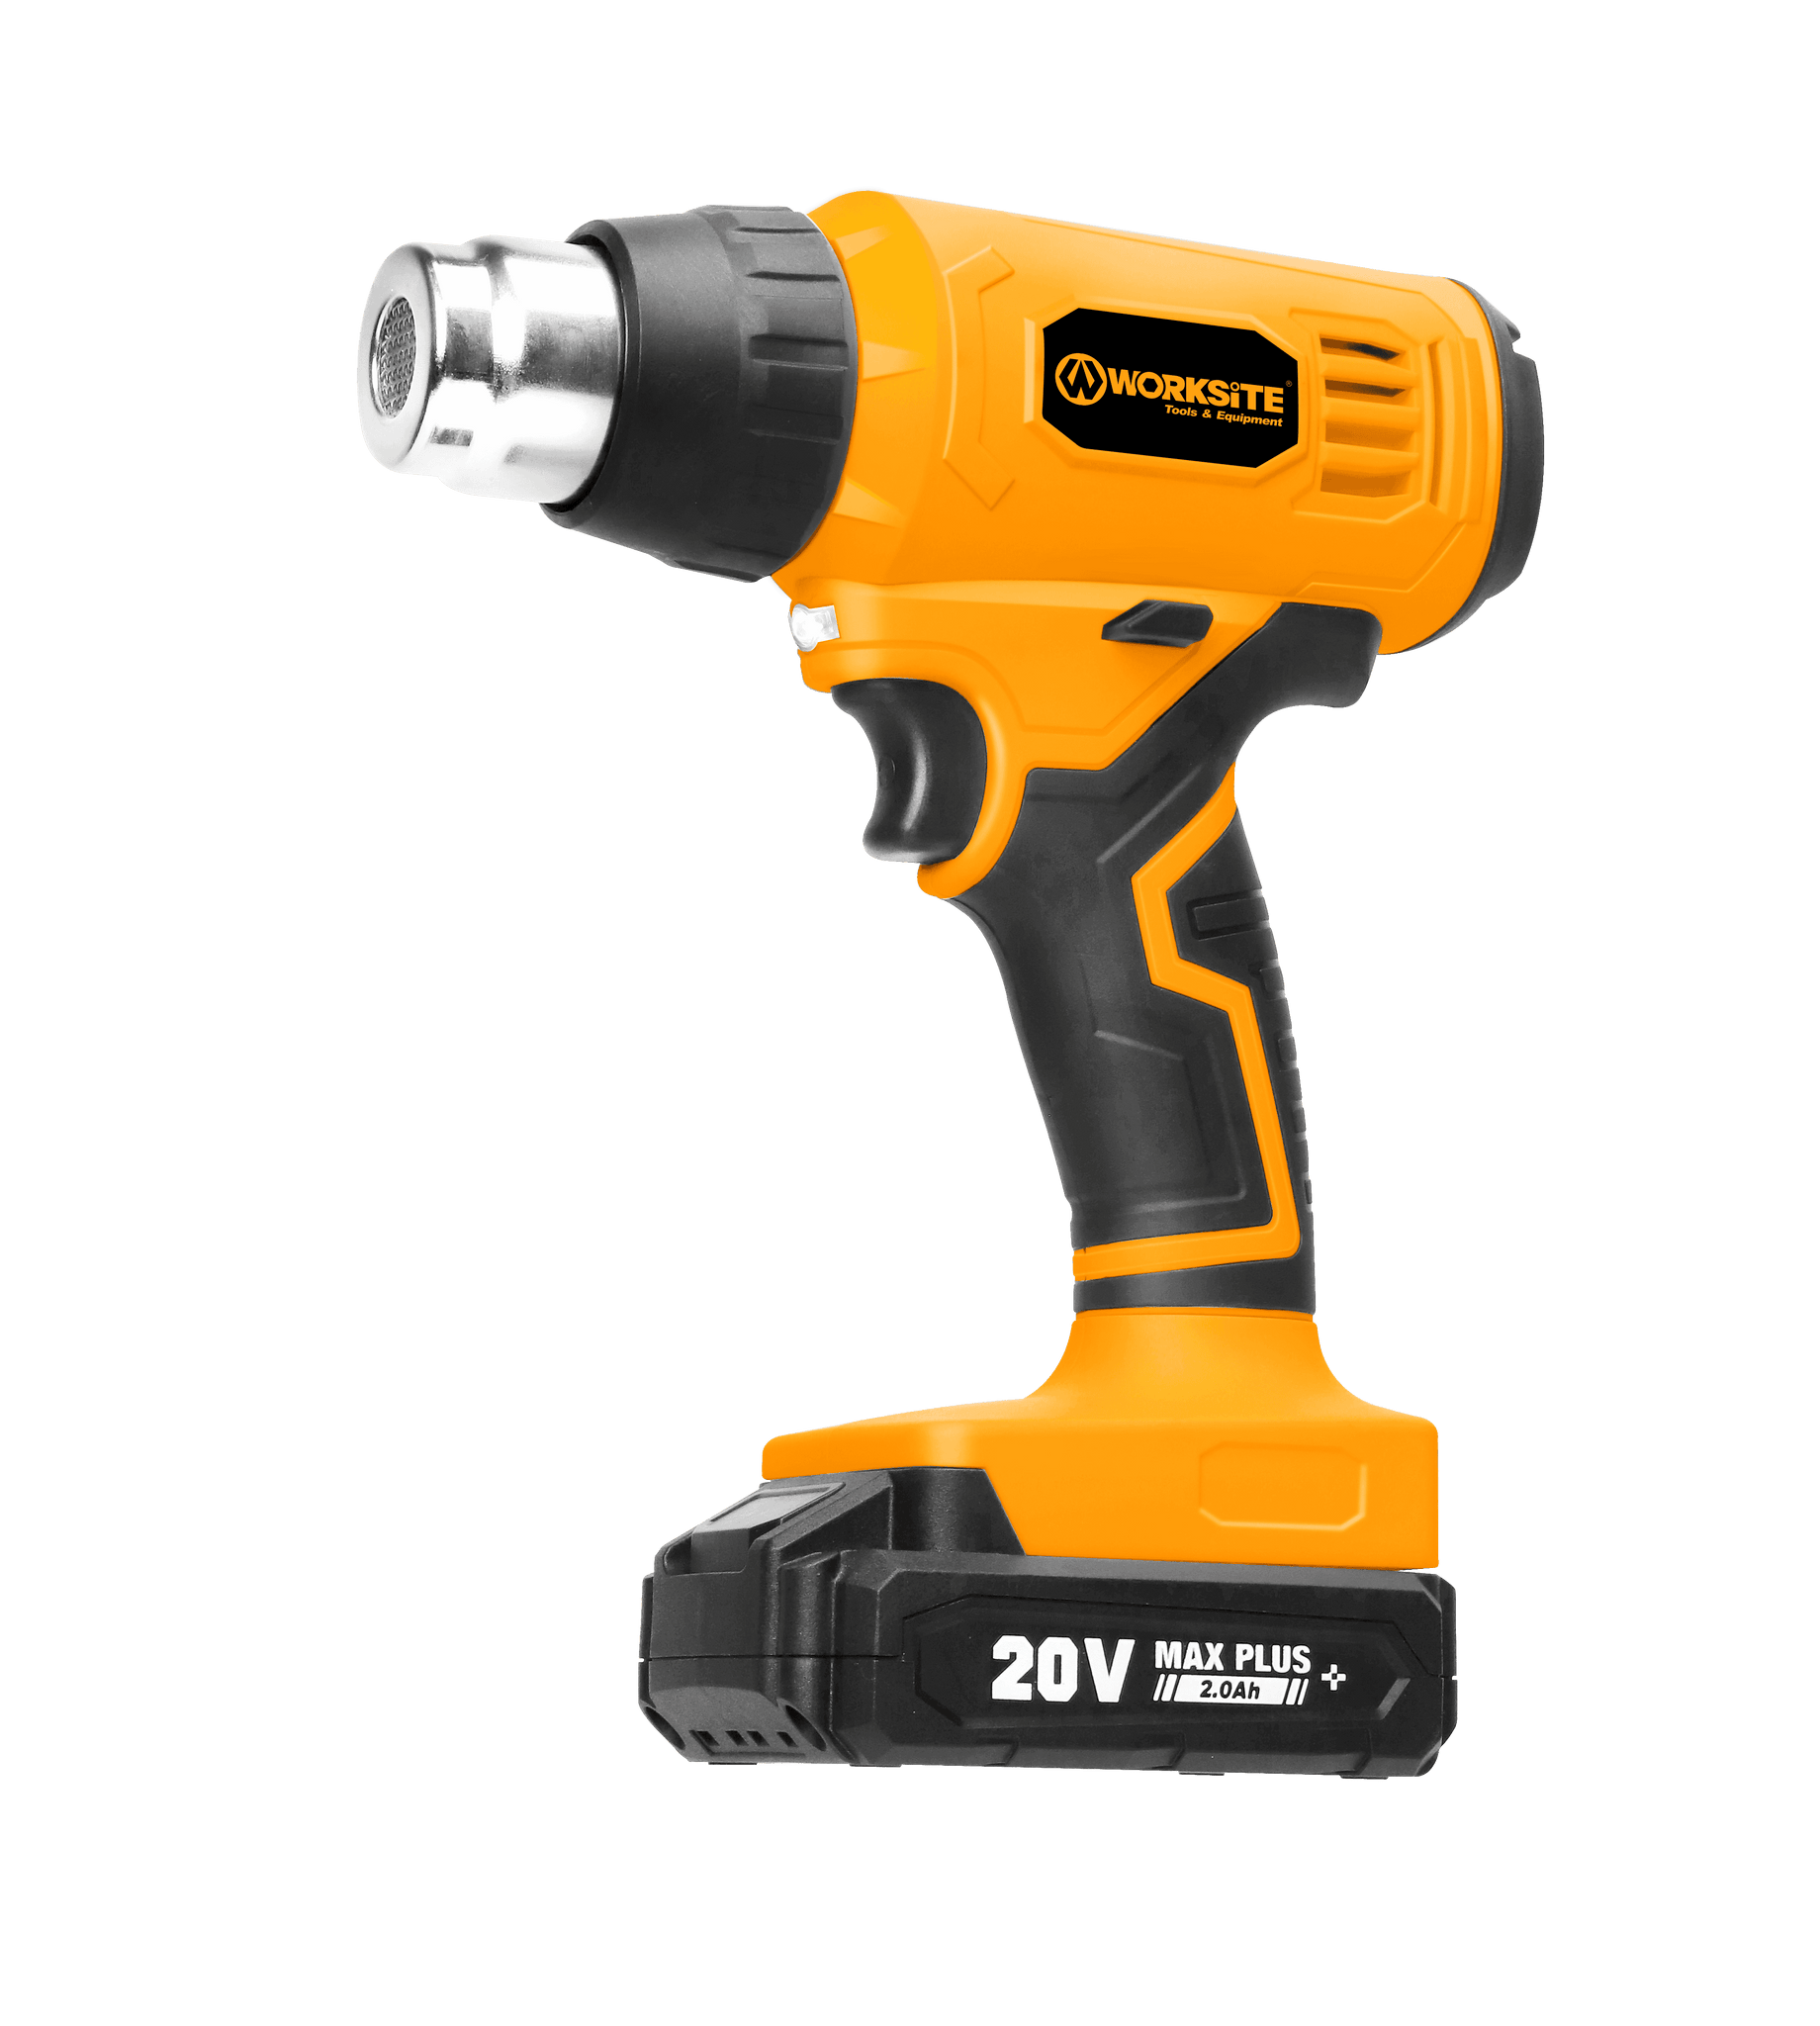 Worksite Tools 20V Cordless Heat Gun 20V Max Lithium-ion Battery Hot Air Gun Kit with 4.0A Battery, Fast Charger & Tool Bag, 4 Nozzle Attachments for Crafts, Shrink PVC and Stripping Paint CHG326